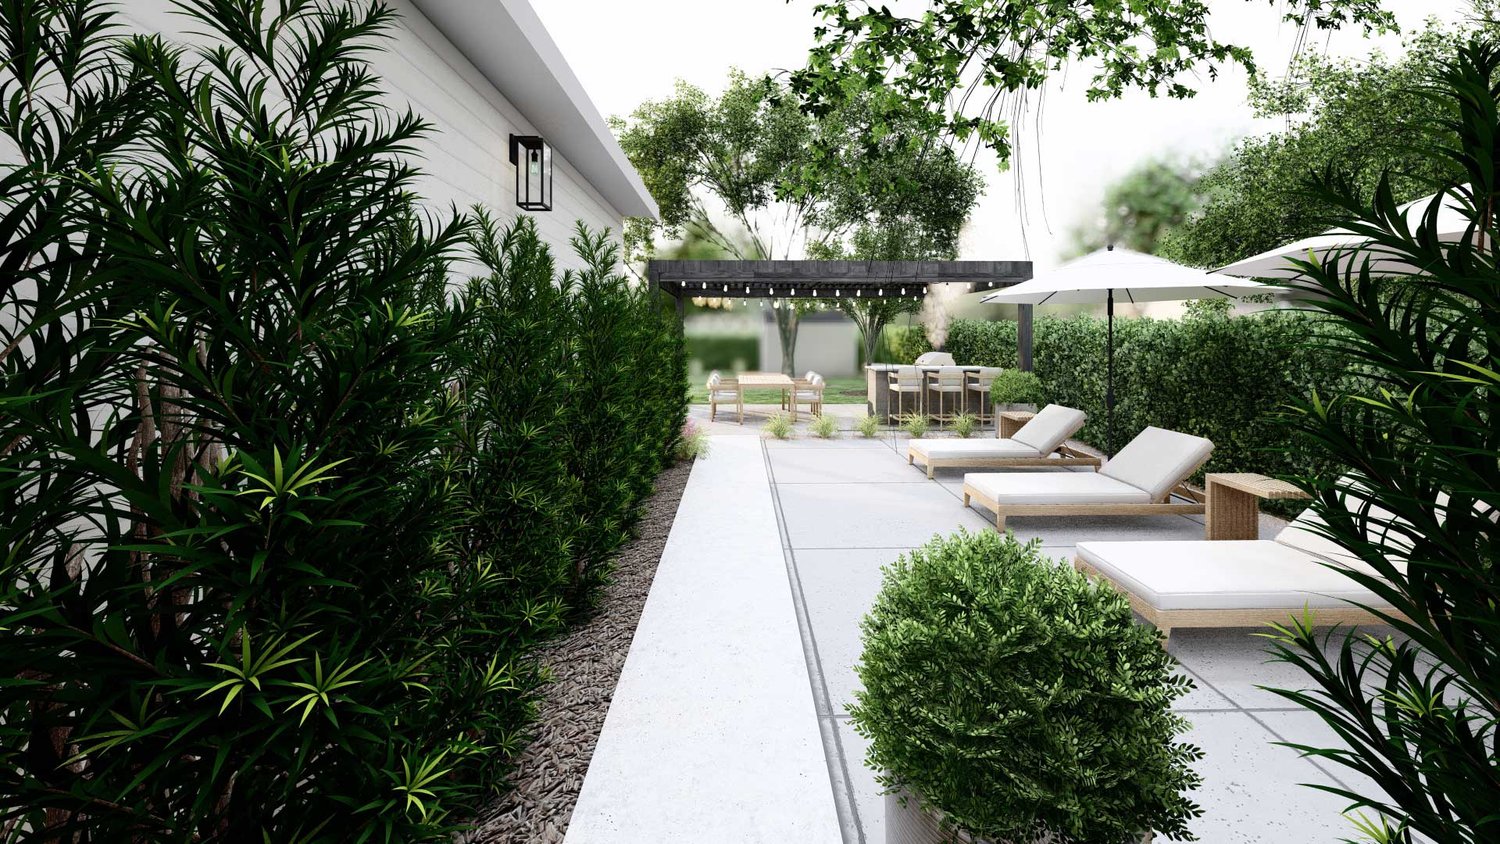 Arlington side yard showing concrete paver sun loungers, plantings and pergola over outdoor kitchen and dining area